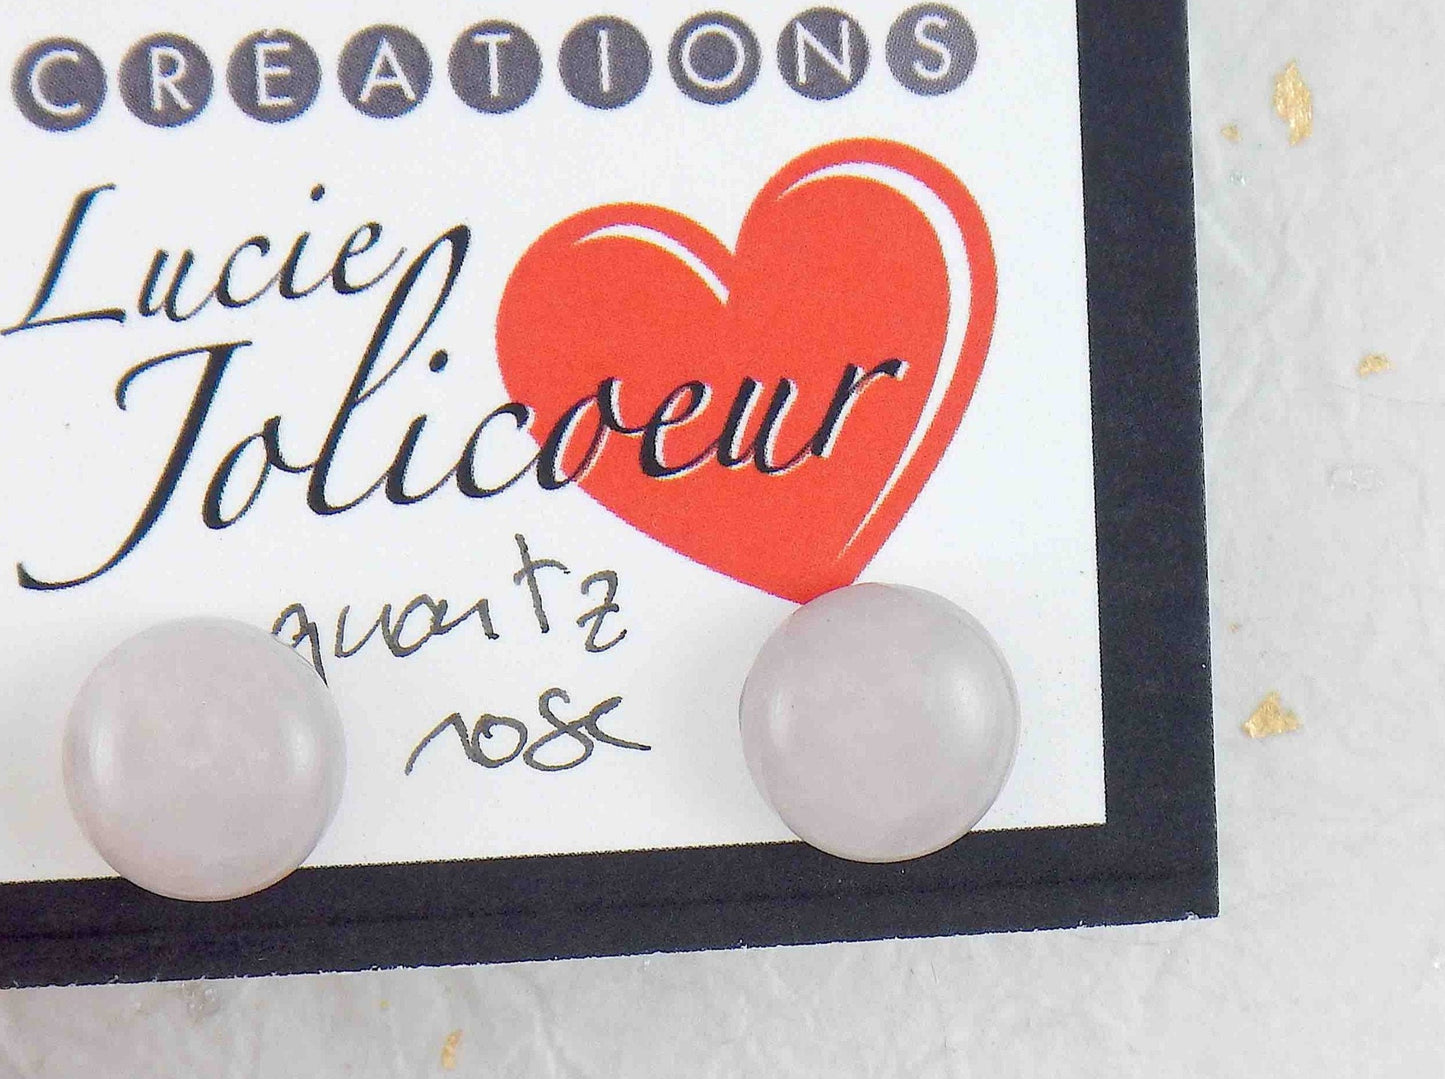 Ear studs with 10mm round rose quartz stone cabochons, stainless steel posts